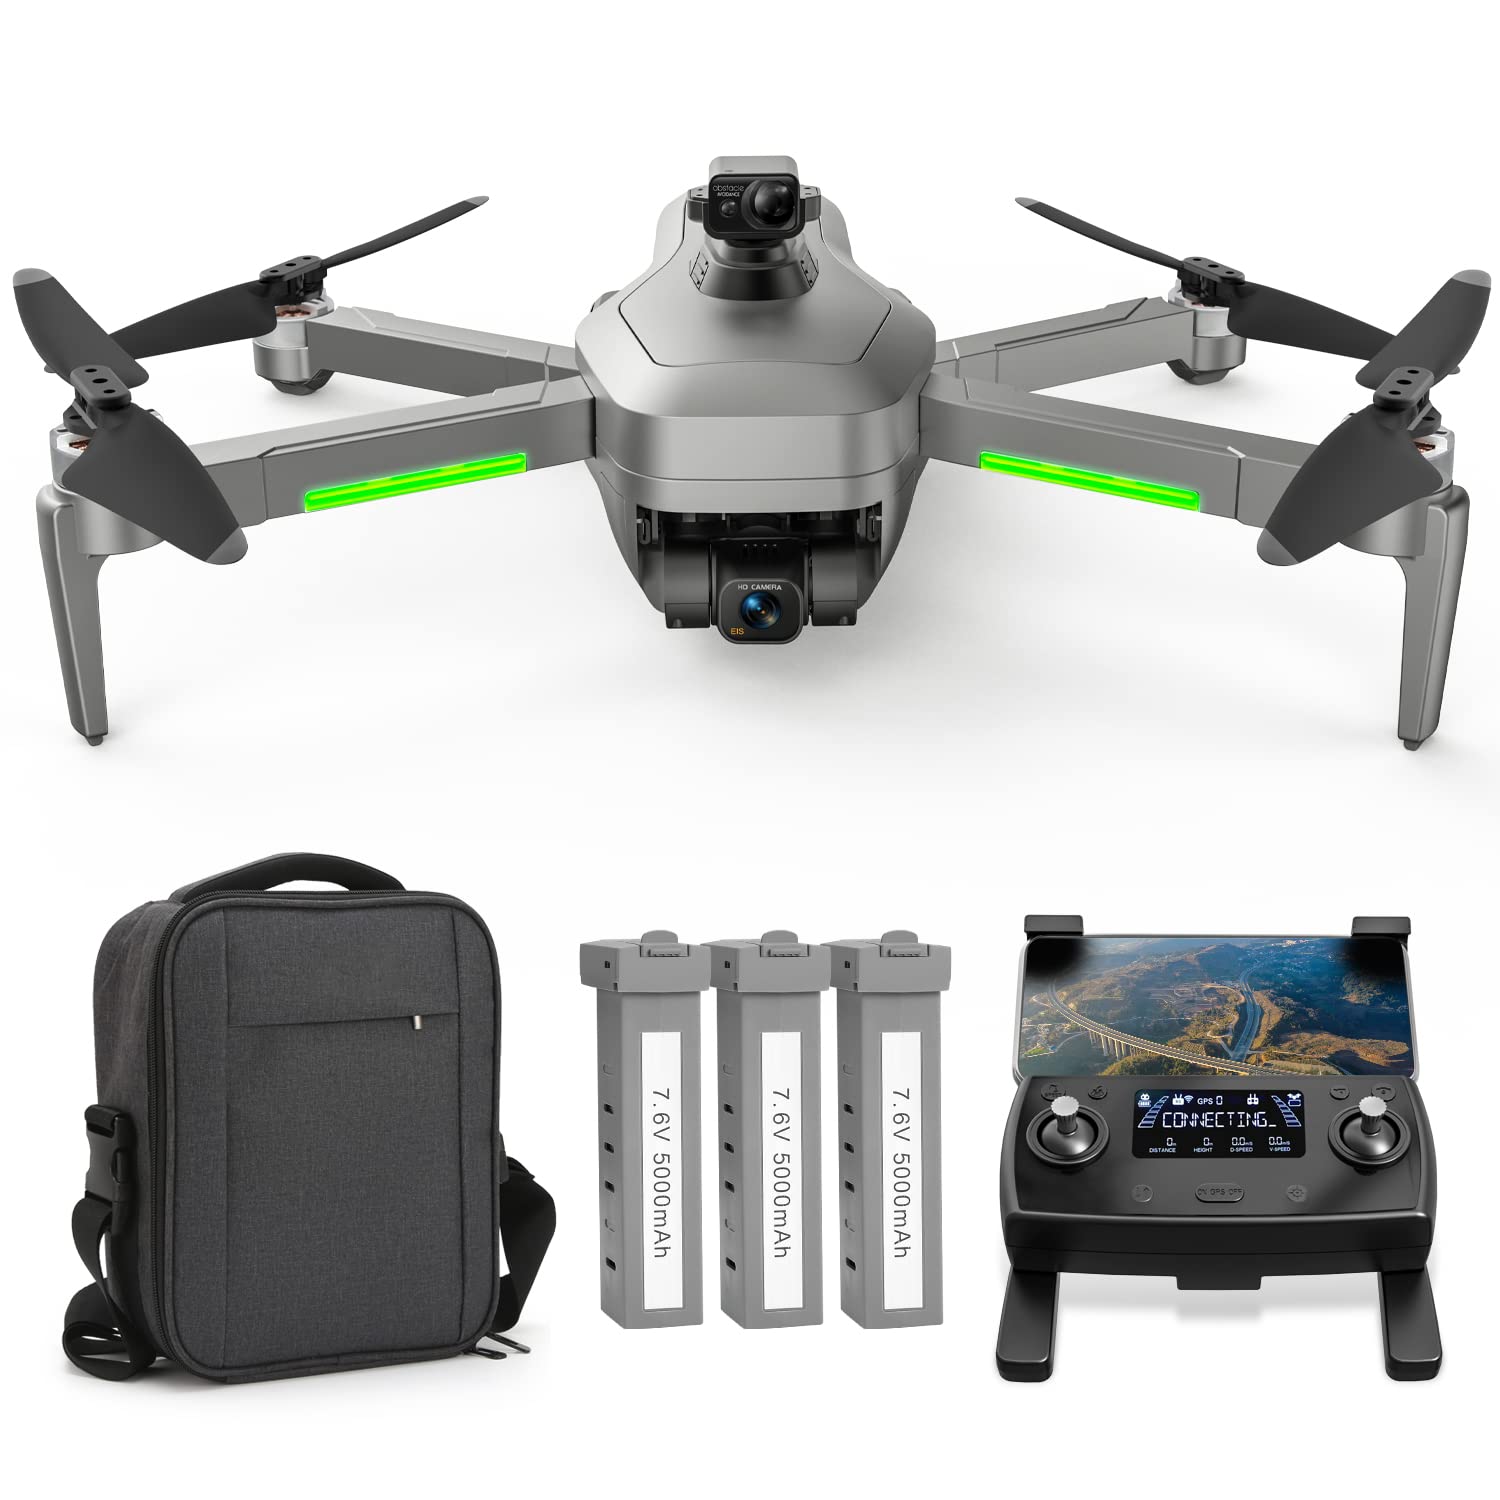 Tucok 193MAX2S Drones with Camera for Adults 4K,3-Axis Gimbal with EIS UHD Camera,99-Min Flight Time,4KM Video Transmission,Obstacle Avoidance,Auto Return Home,GPS FPV RC Quadcopter with Brushless Motor